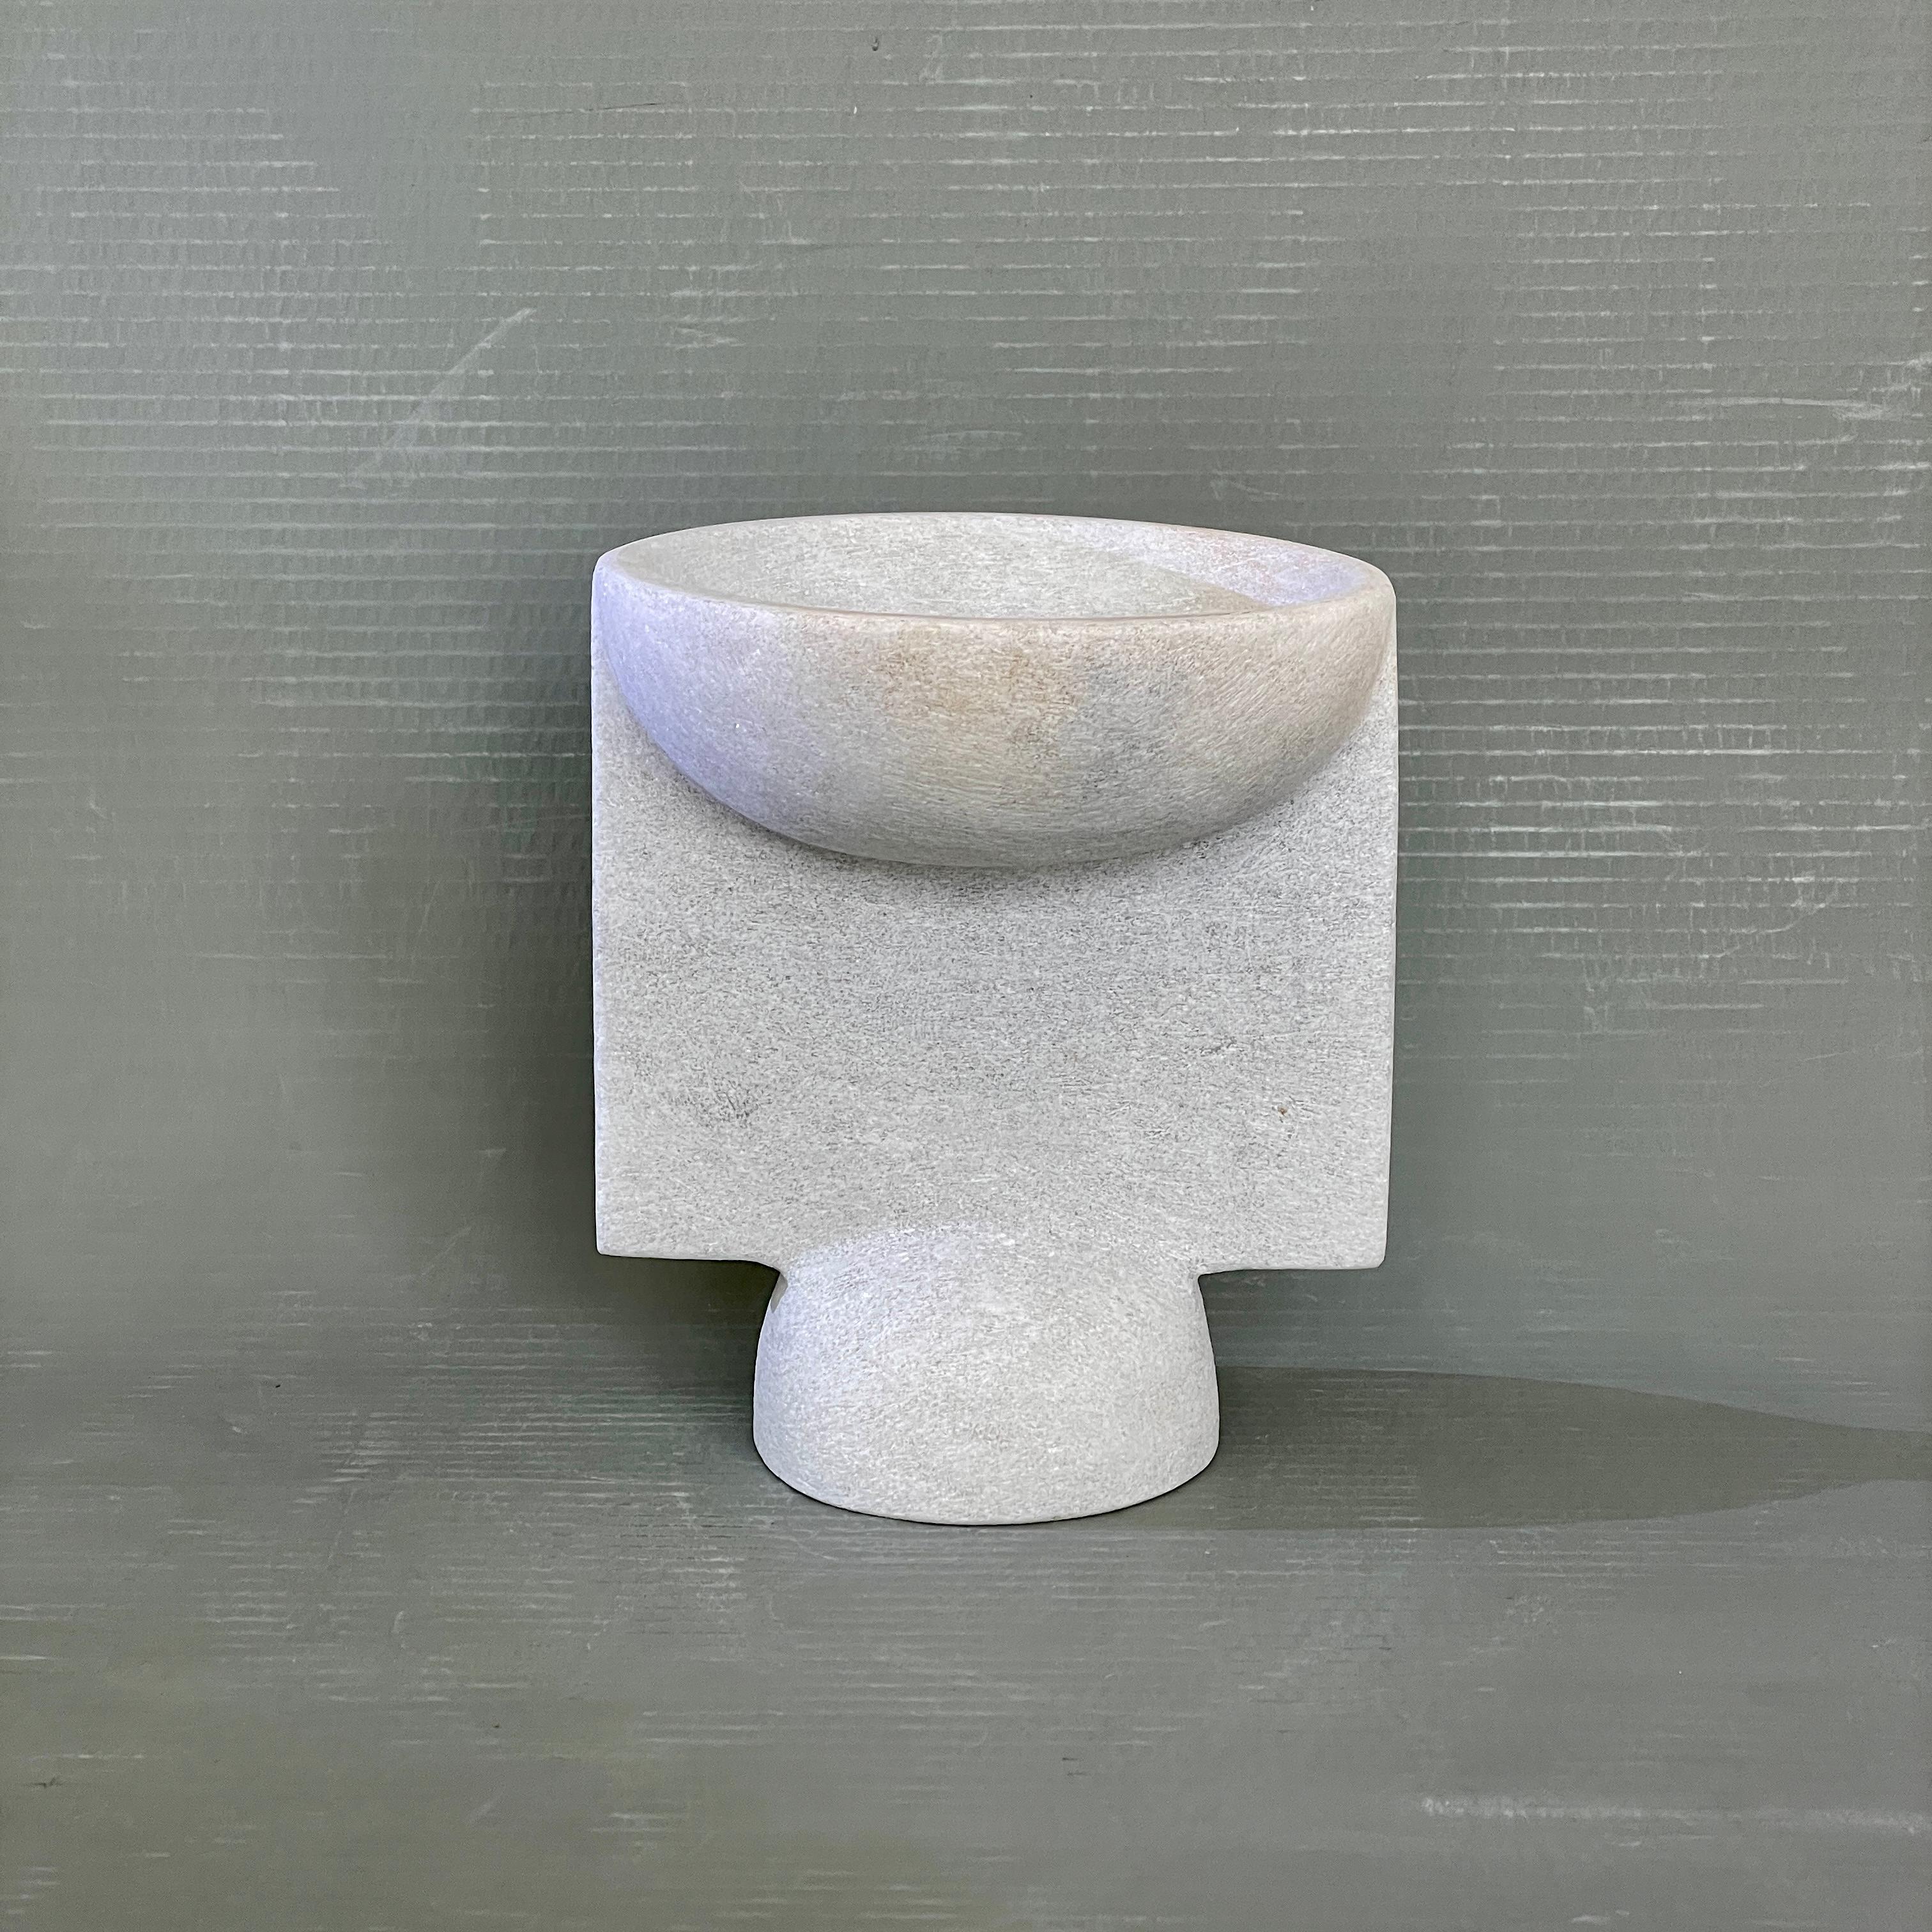 Hand carved marble vessel by Tom Von Kaenel.
Materials: marble.
Dimensions: W 17 x D 17 x H 20 cm.

Tom von Kaenel, sculptor and painter, was born in Switzerland in 1961. Already in his early
childhood he was deeply devoted to art. His desire